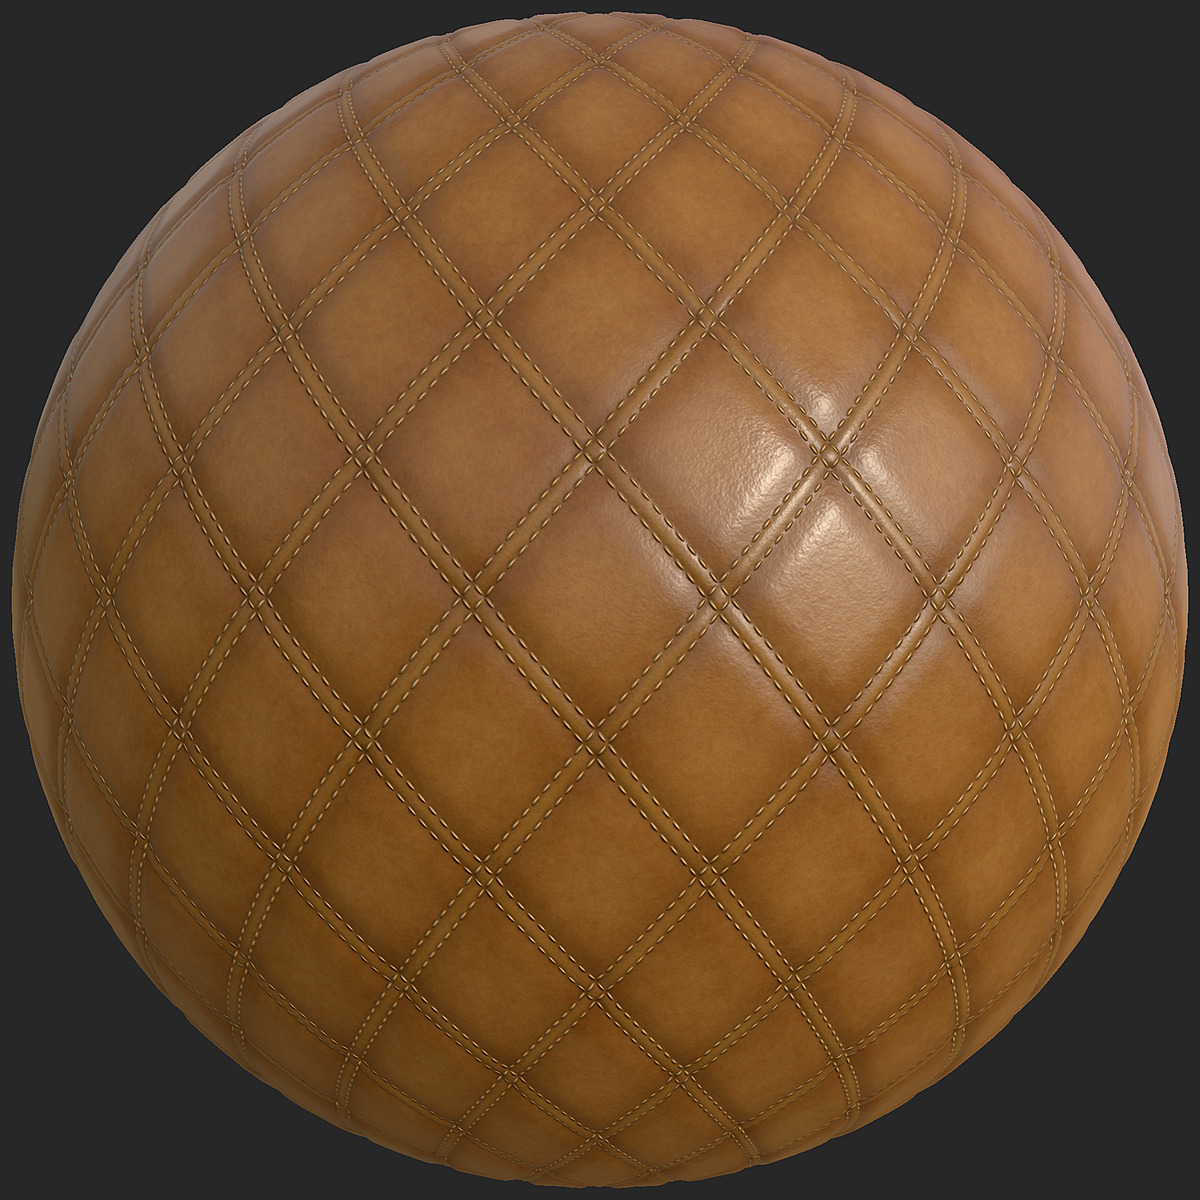 PBR Seamless Textures - Tufted Leather Fabric Seamless PBR Texture